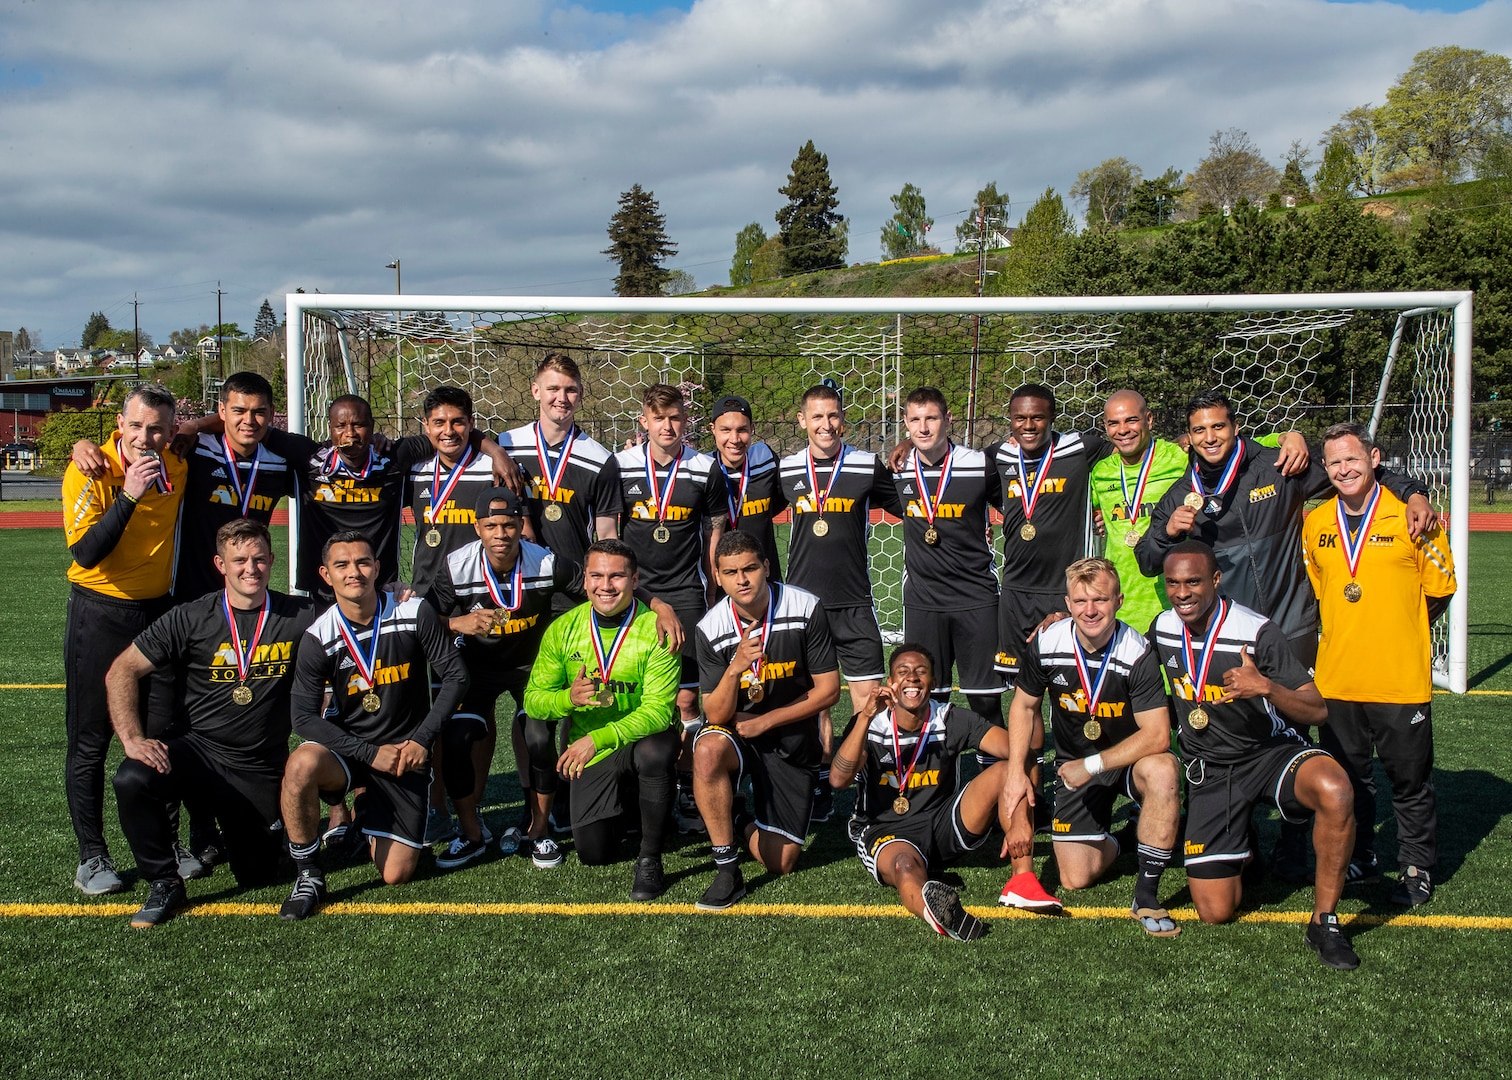 NAVAL STATION EVERETT, Wash.  (April 20, 2019) Army wins the 2019 Armed Forces Men's Soccer Championship held at Naval Station Everett, Wash. from 14-20 April, featuring Service members from the Army, Marine Corps, Navy (including Coast Guard) and Air Force. (U.S. Navy photo by MC2 Ian Carver/Released)